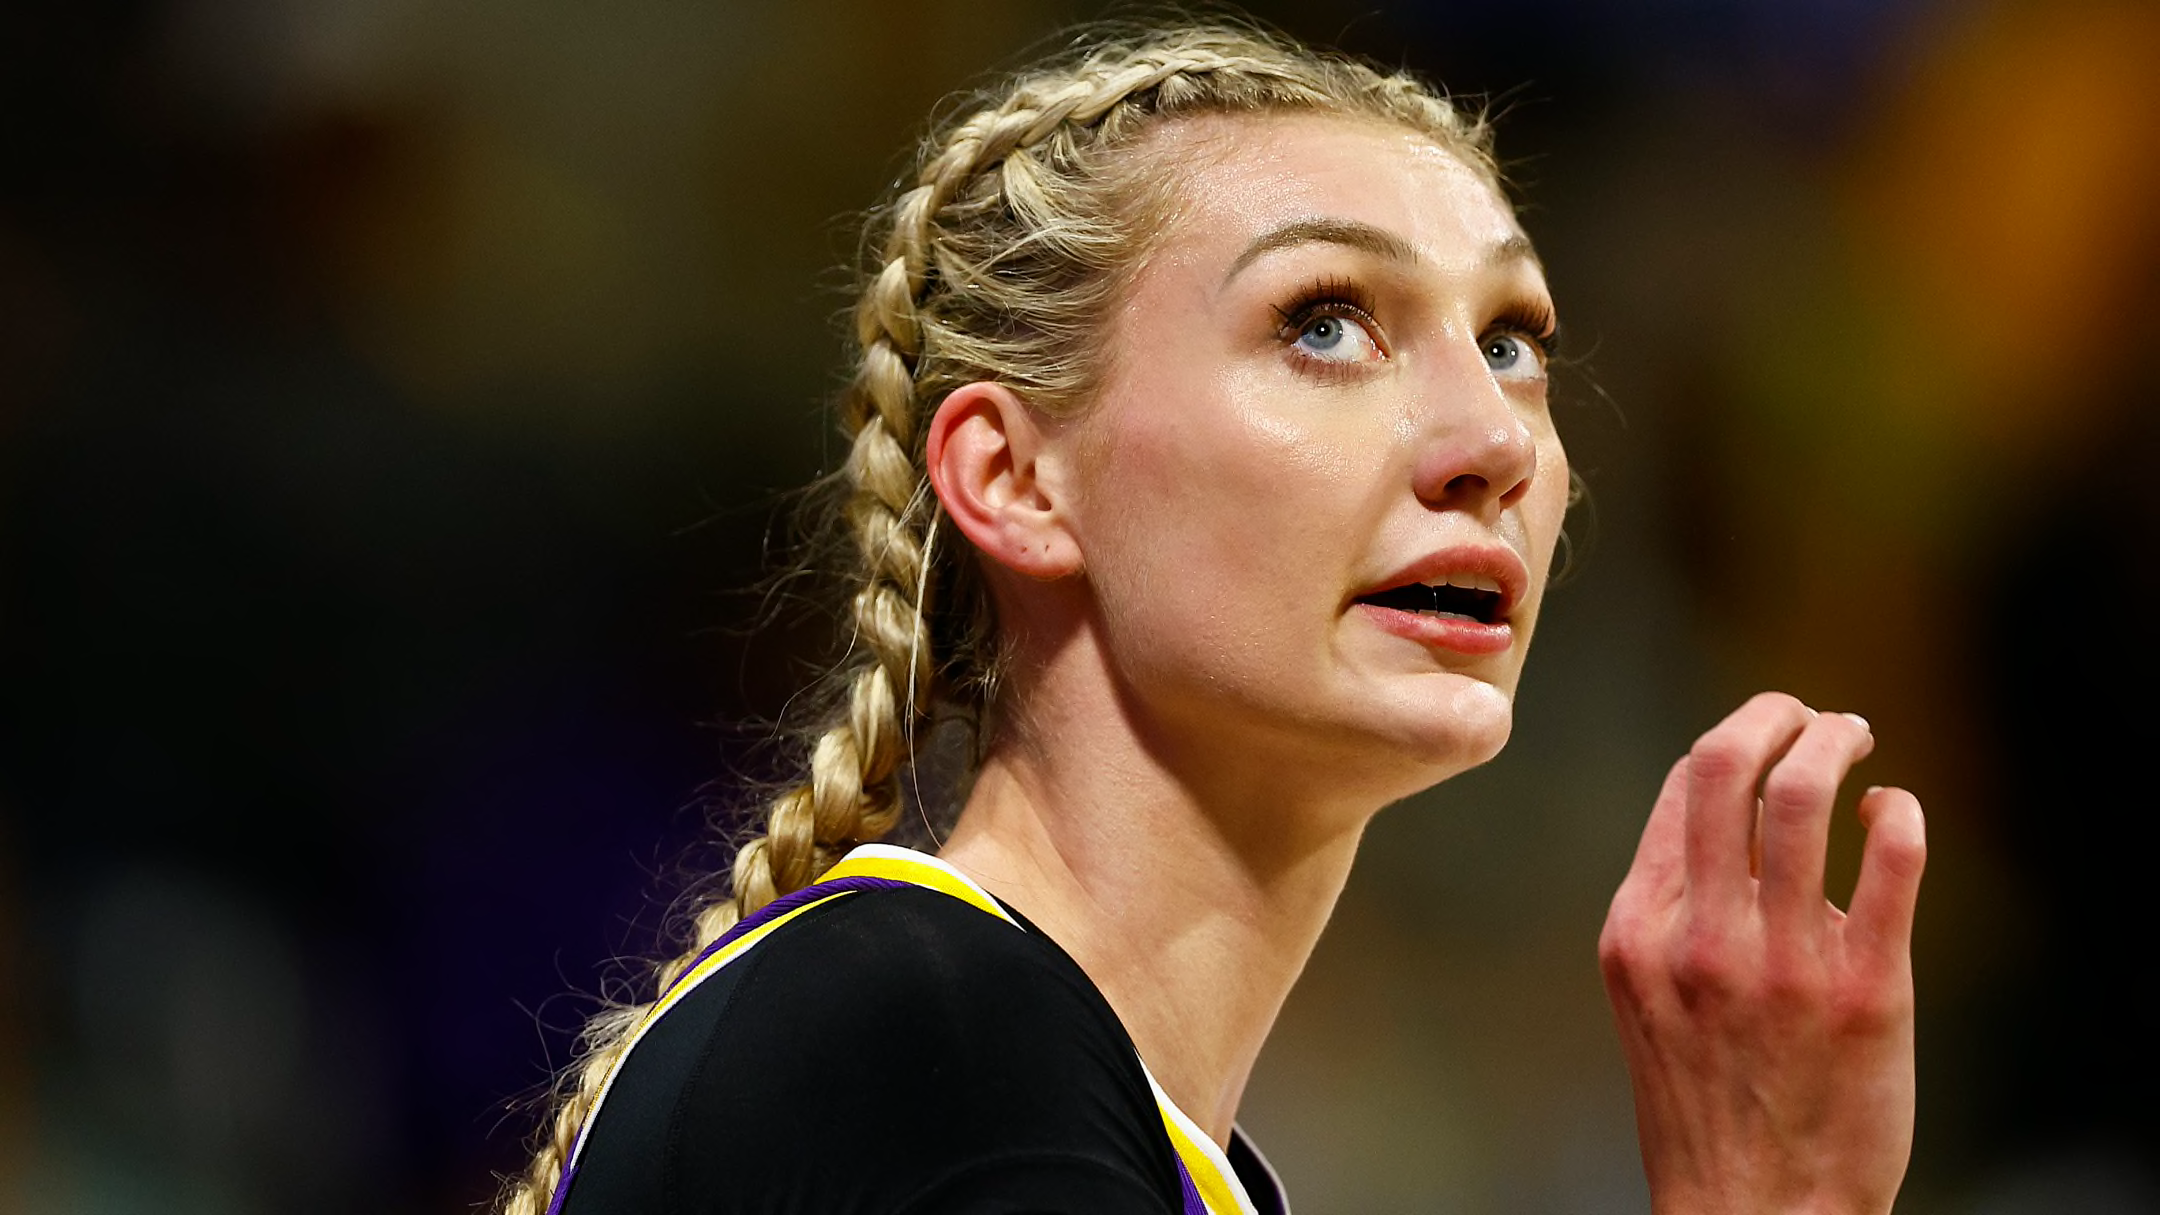 Cameron Brink is already showing signs of unicorn potential after just one game in her WNBA career